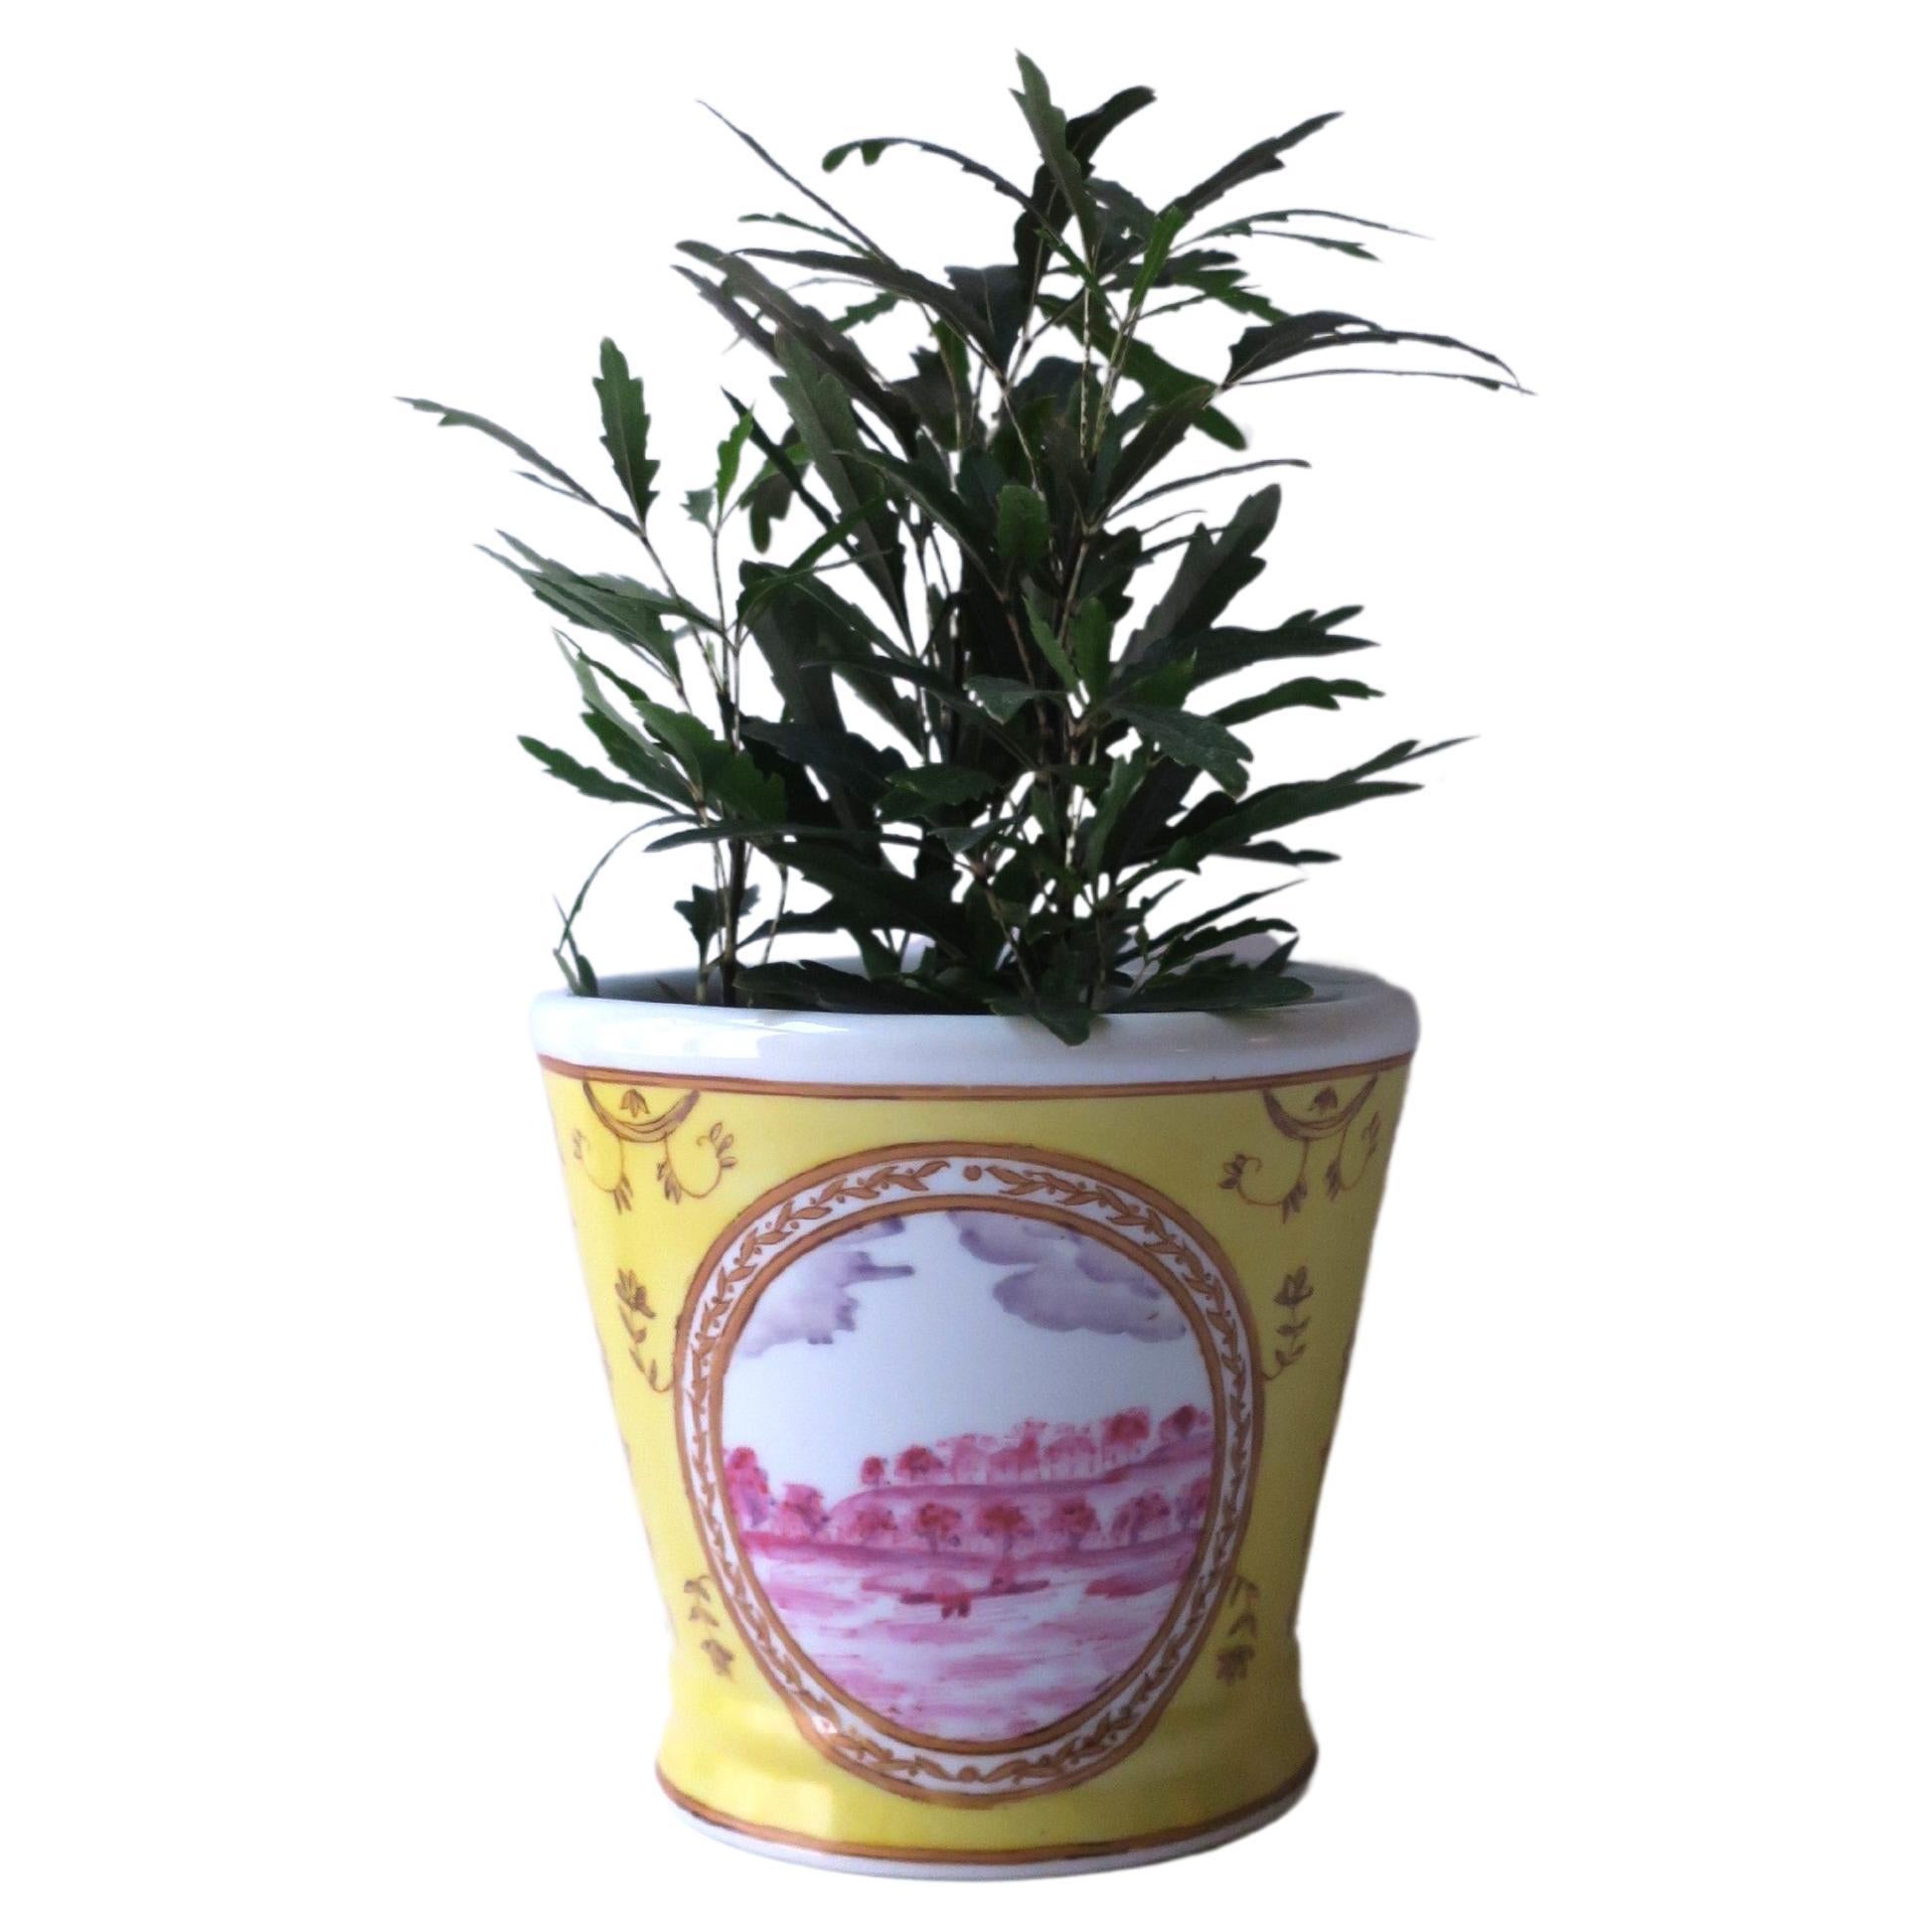 Plant or Flowerpot Cachepot Jardinière with Neoclassical Design For Sale